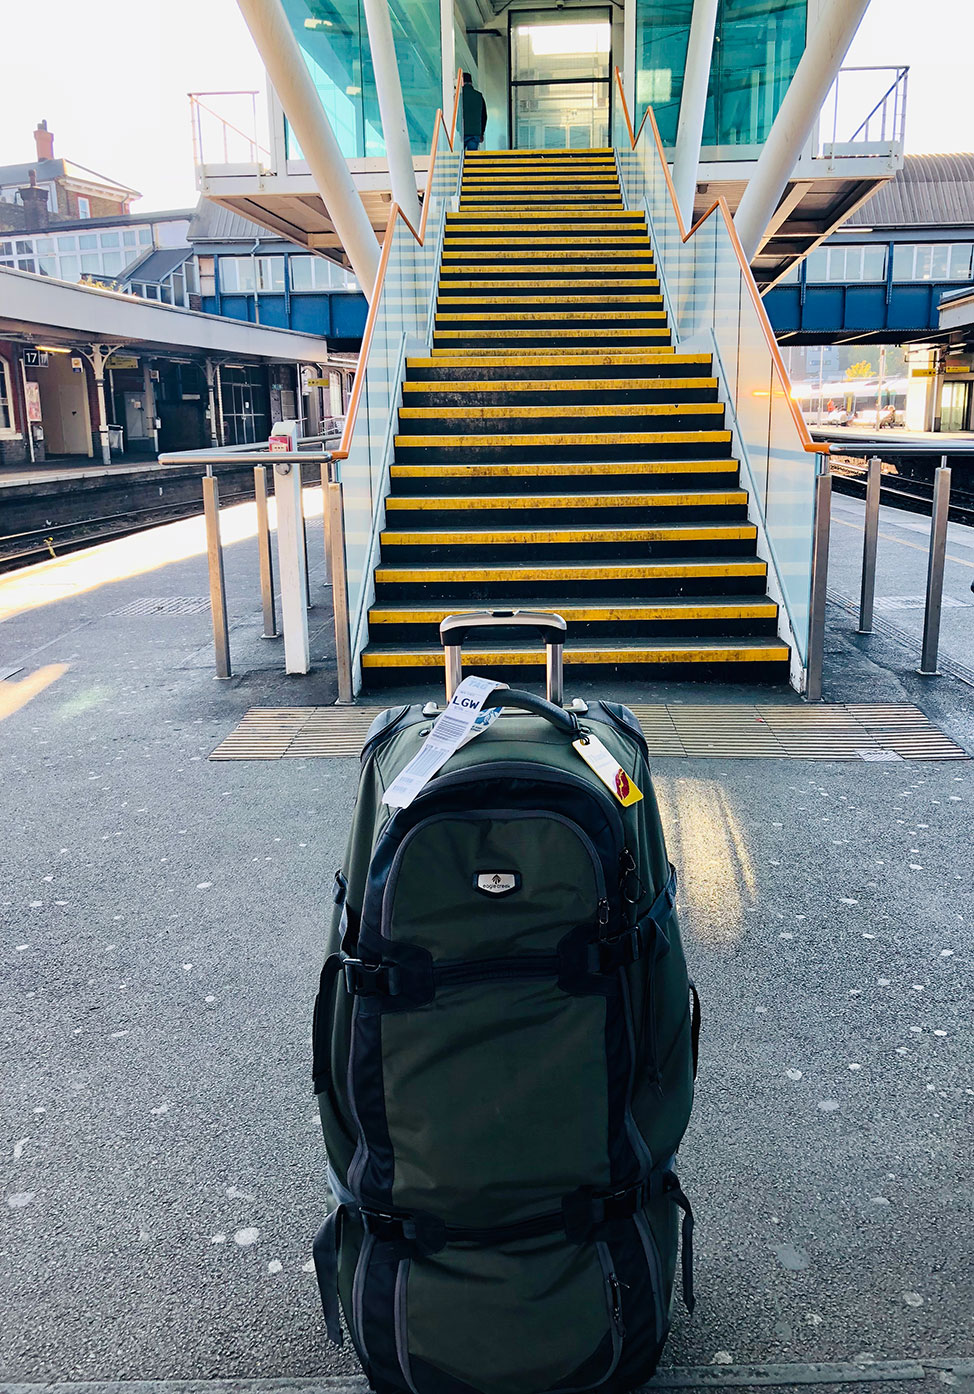 A big suitcase and lots of stairs are not good partners. What to do with luggage when you're out and about in the city? BAGBNB!